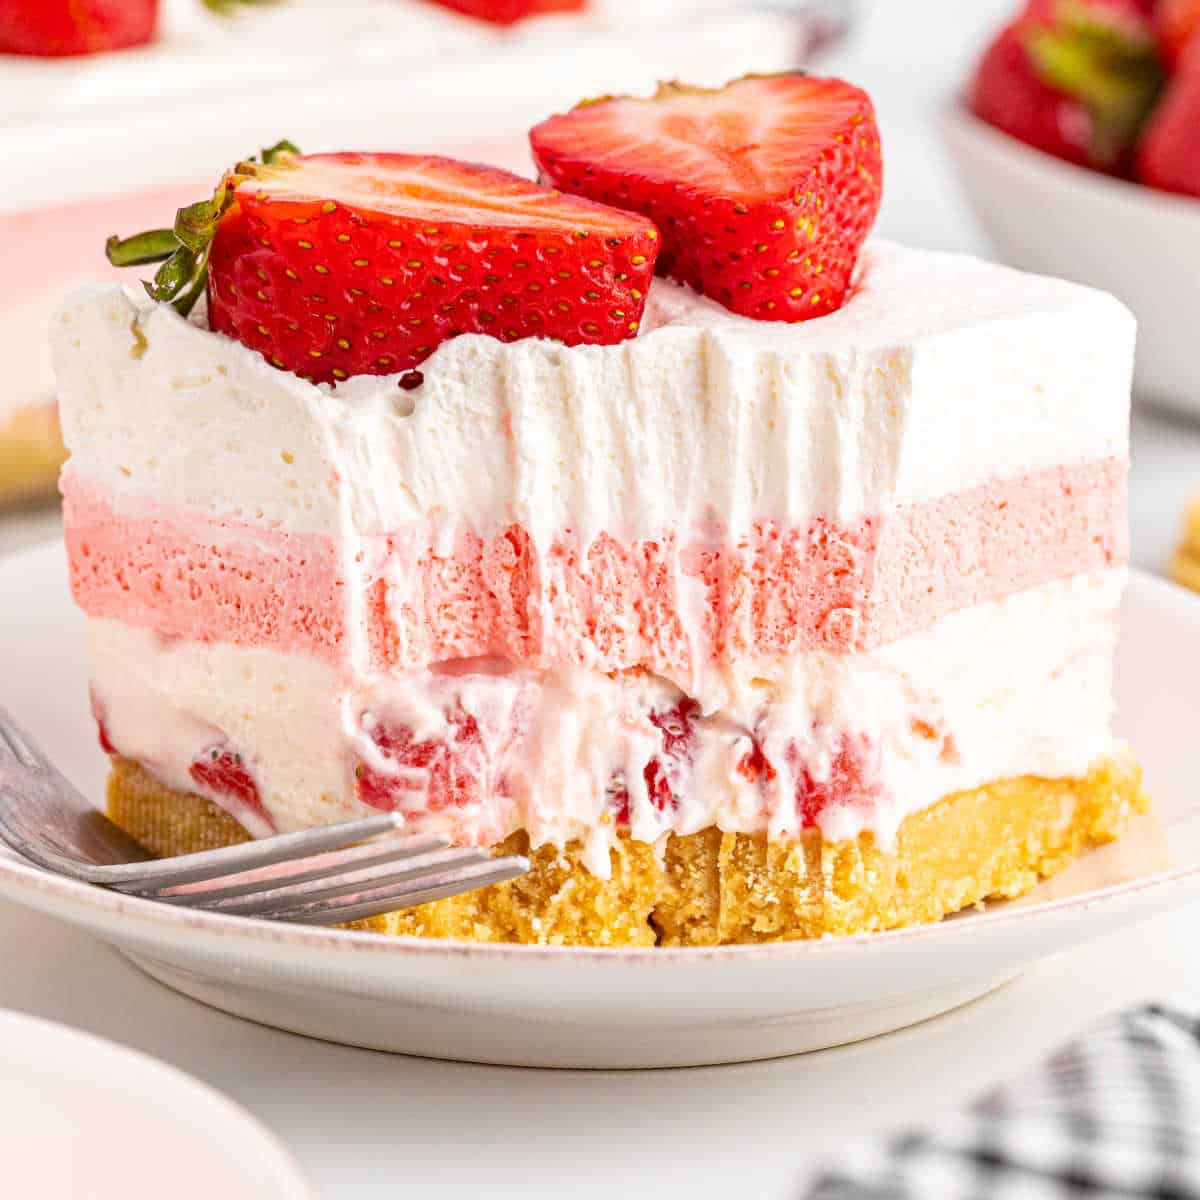 a close up picture of a piece of strawberry delight with a bite taken out showing the strawberry and cream cheese layers